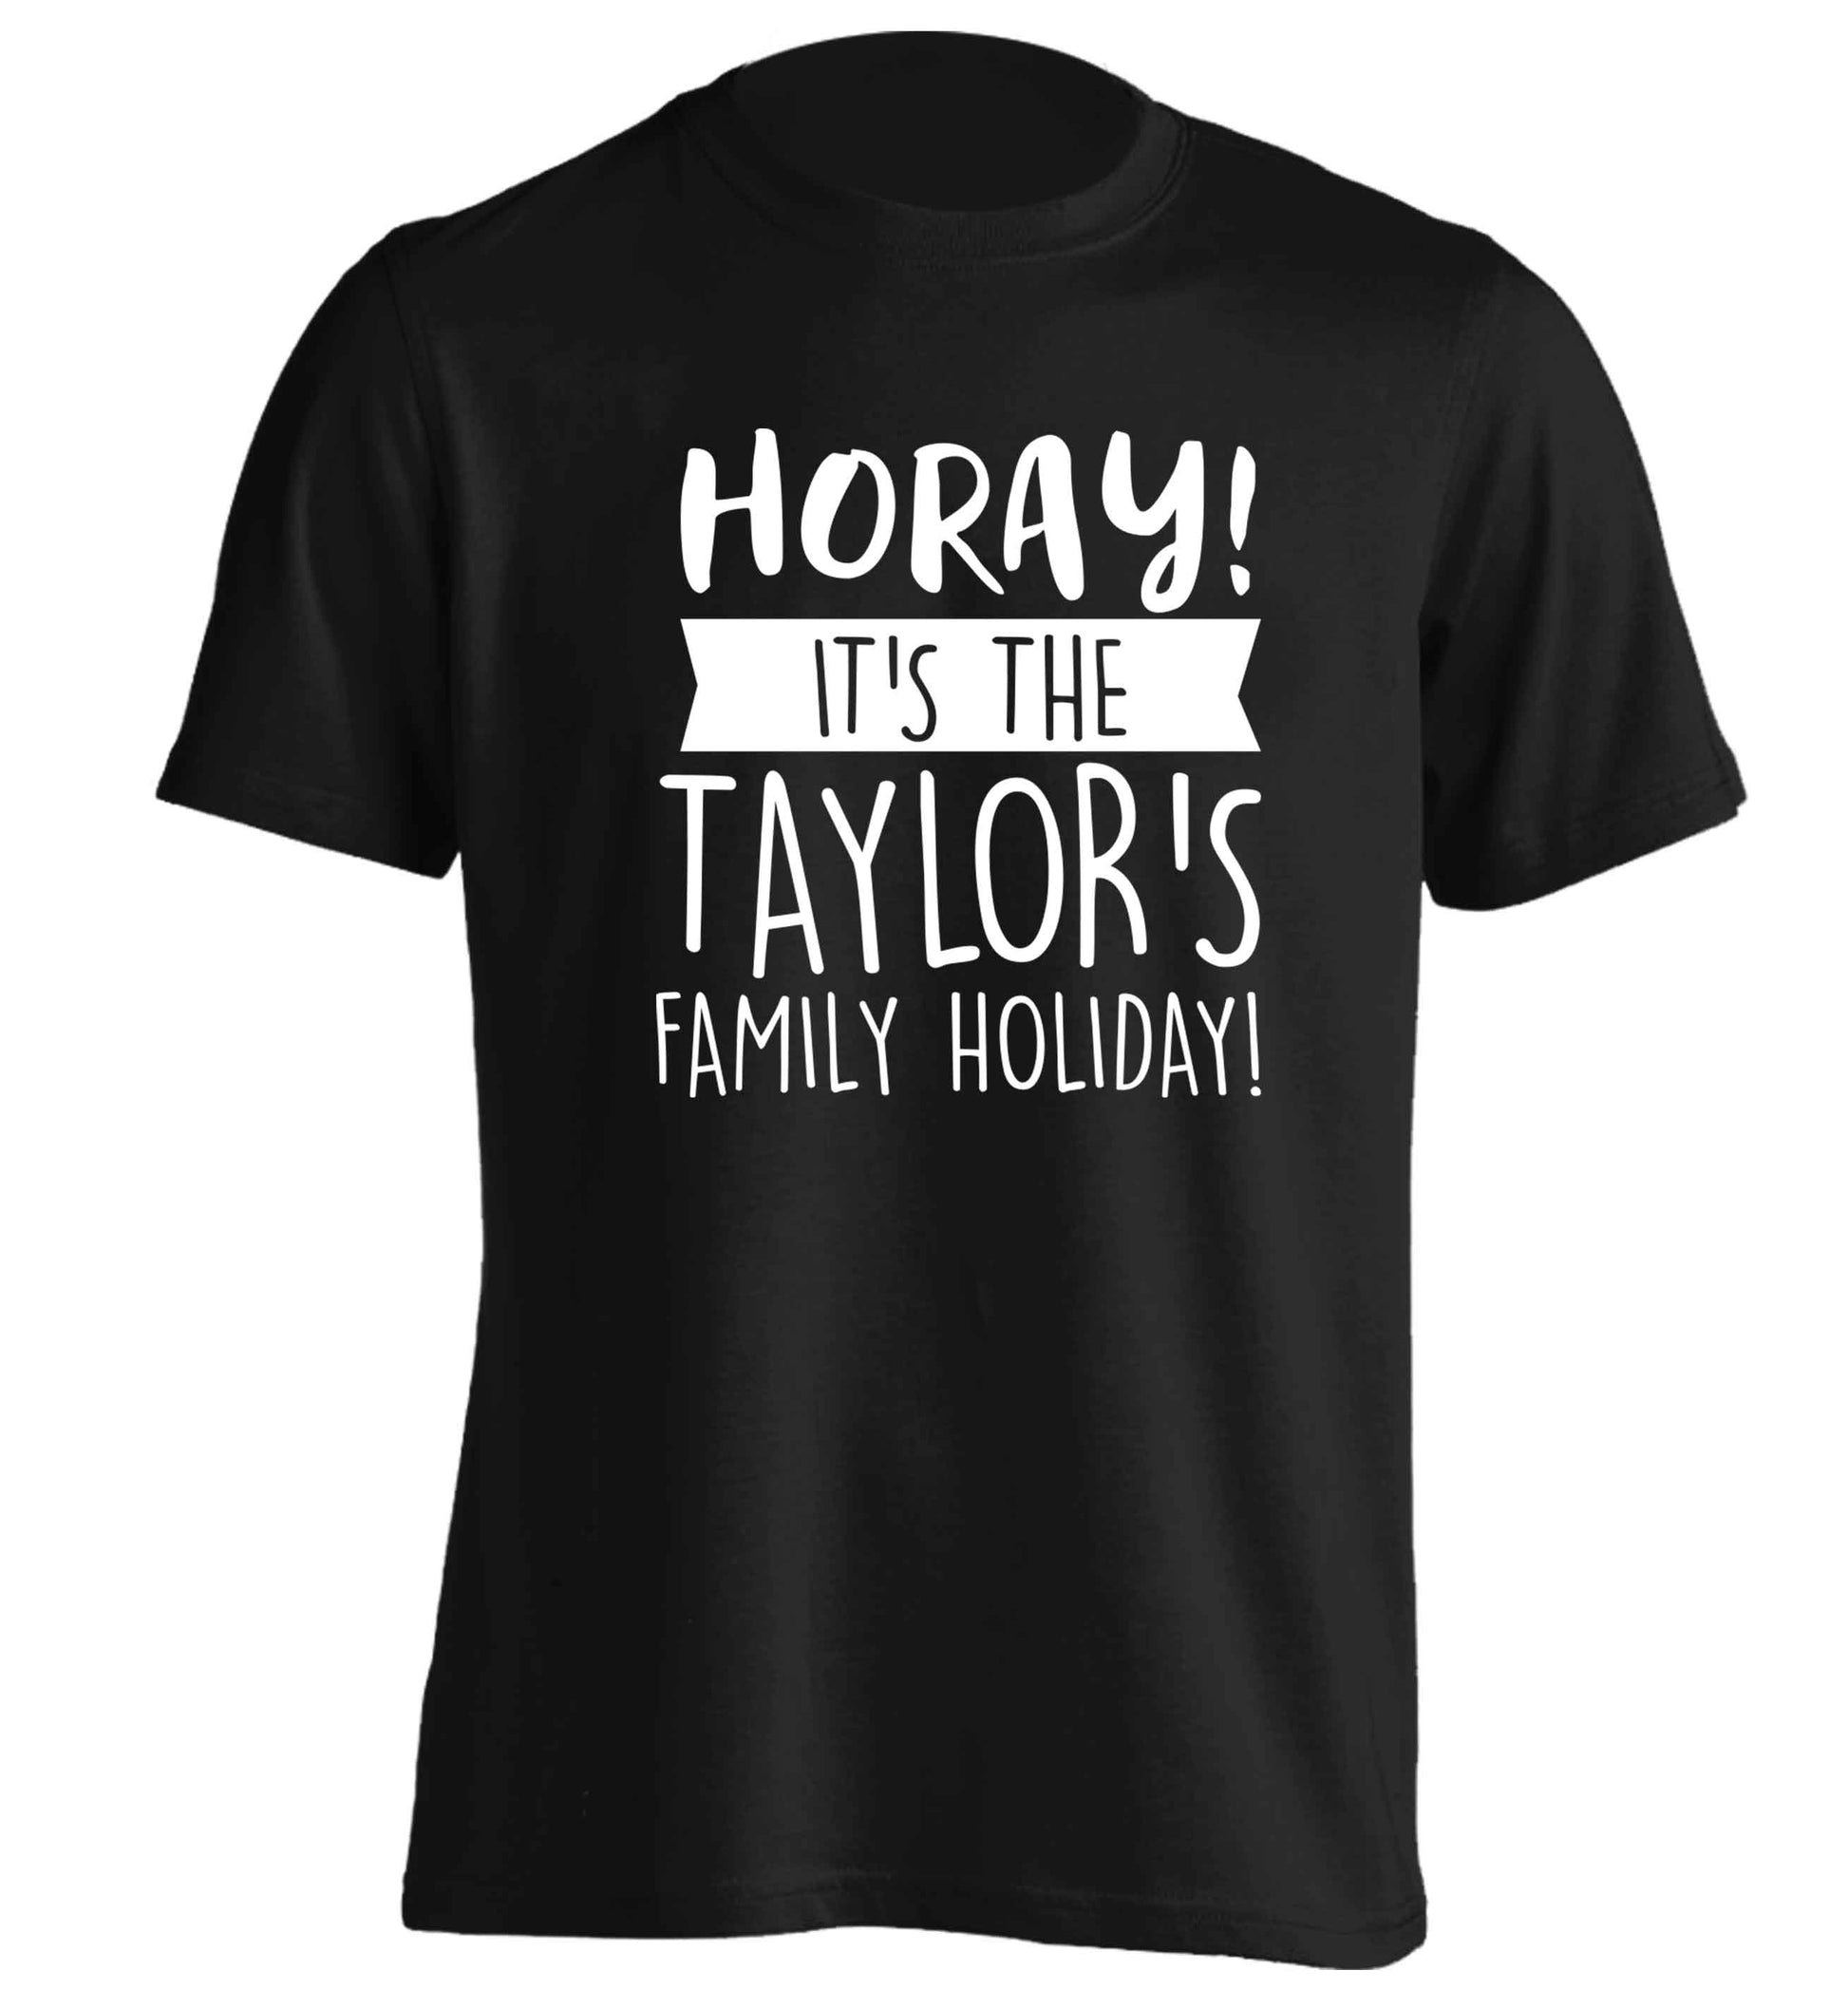 Horay it's the Taylor's family holiday! personalised item adults unisex black Tshirt 2XL